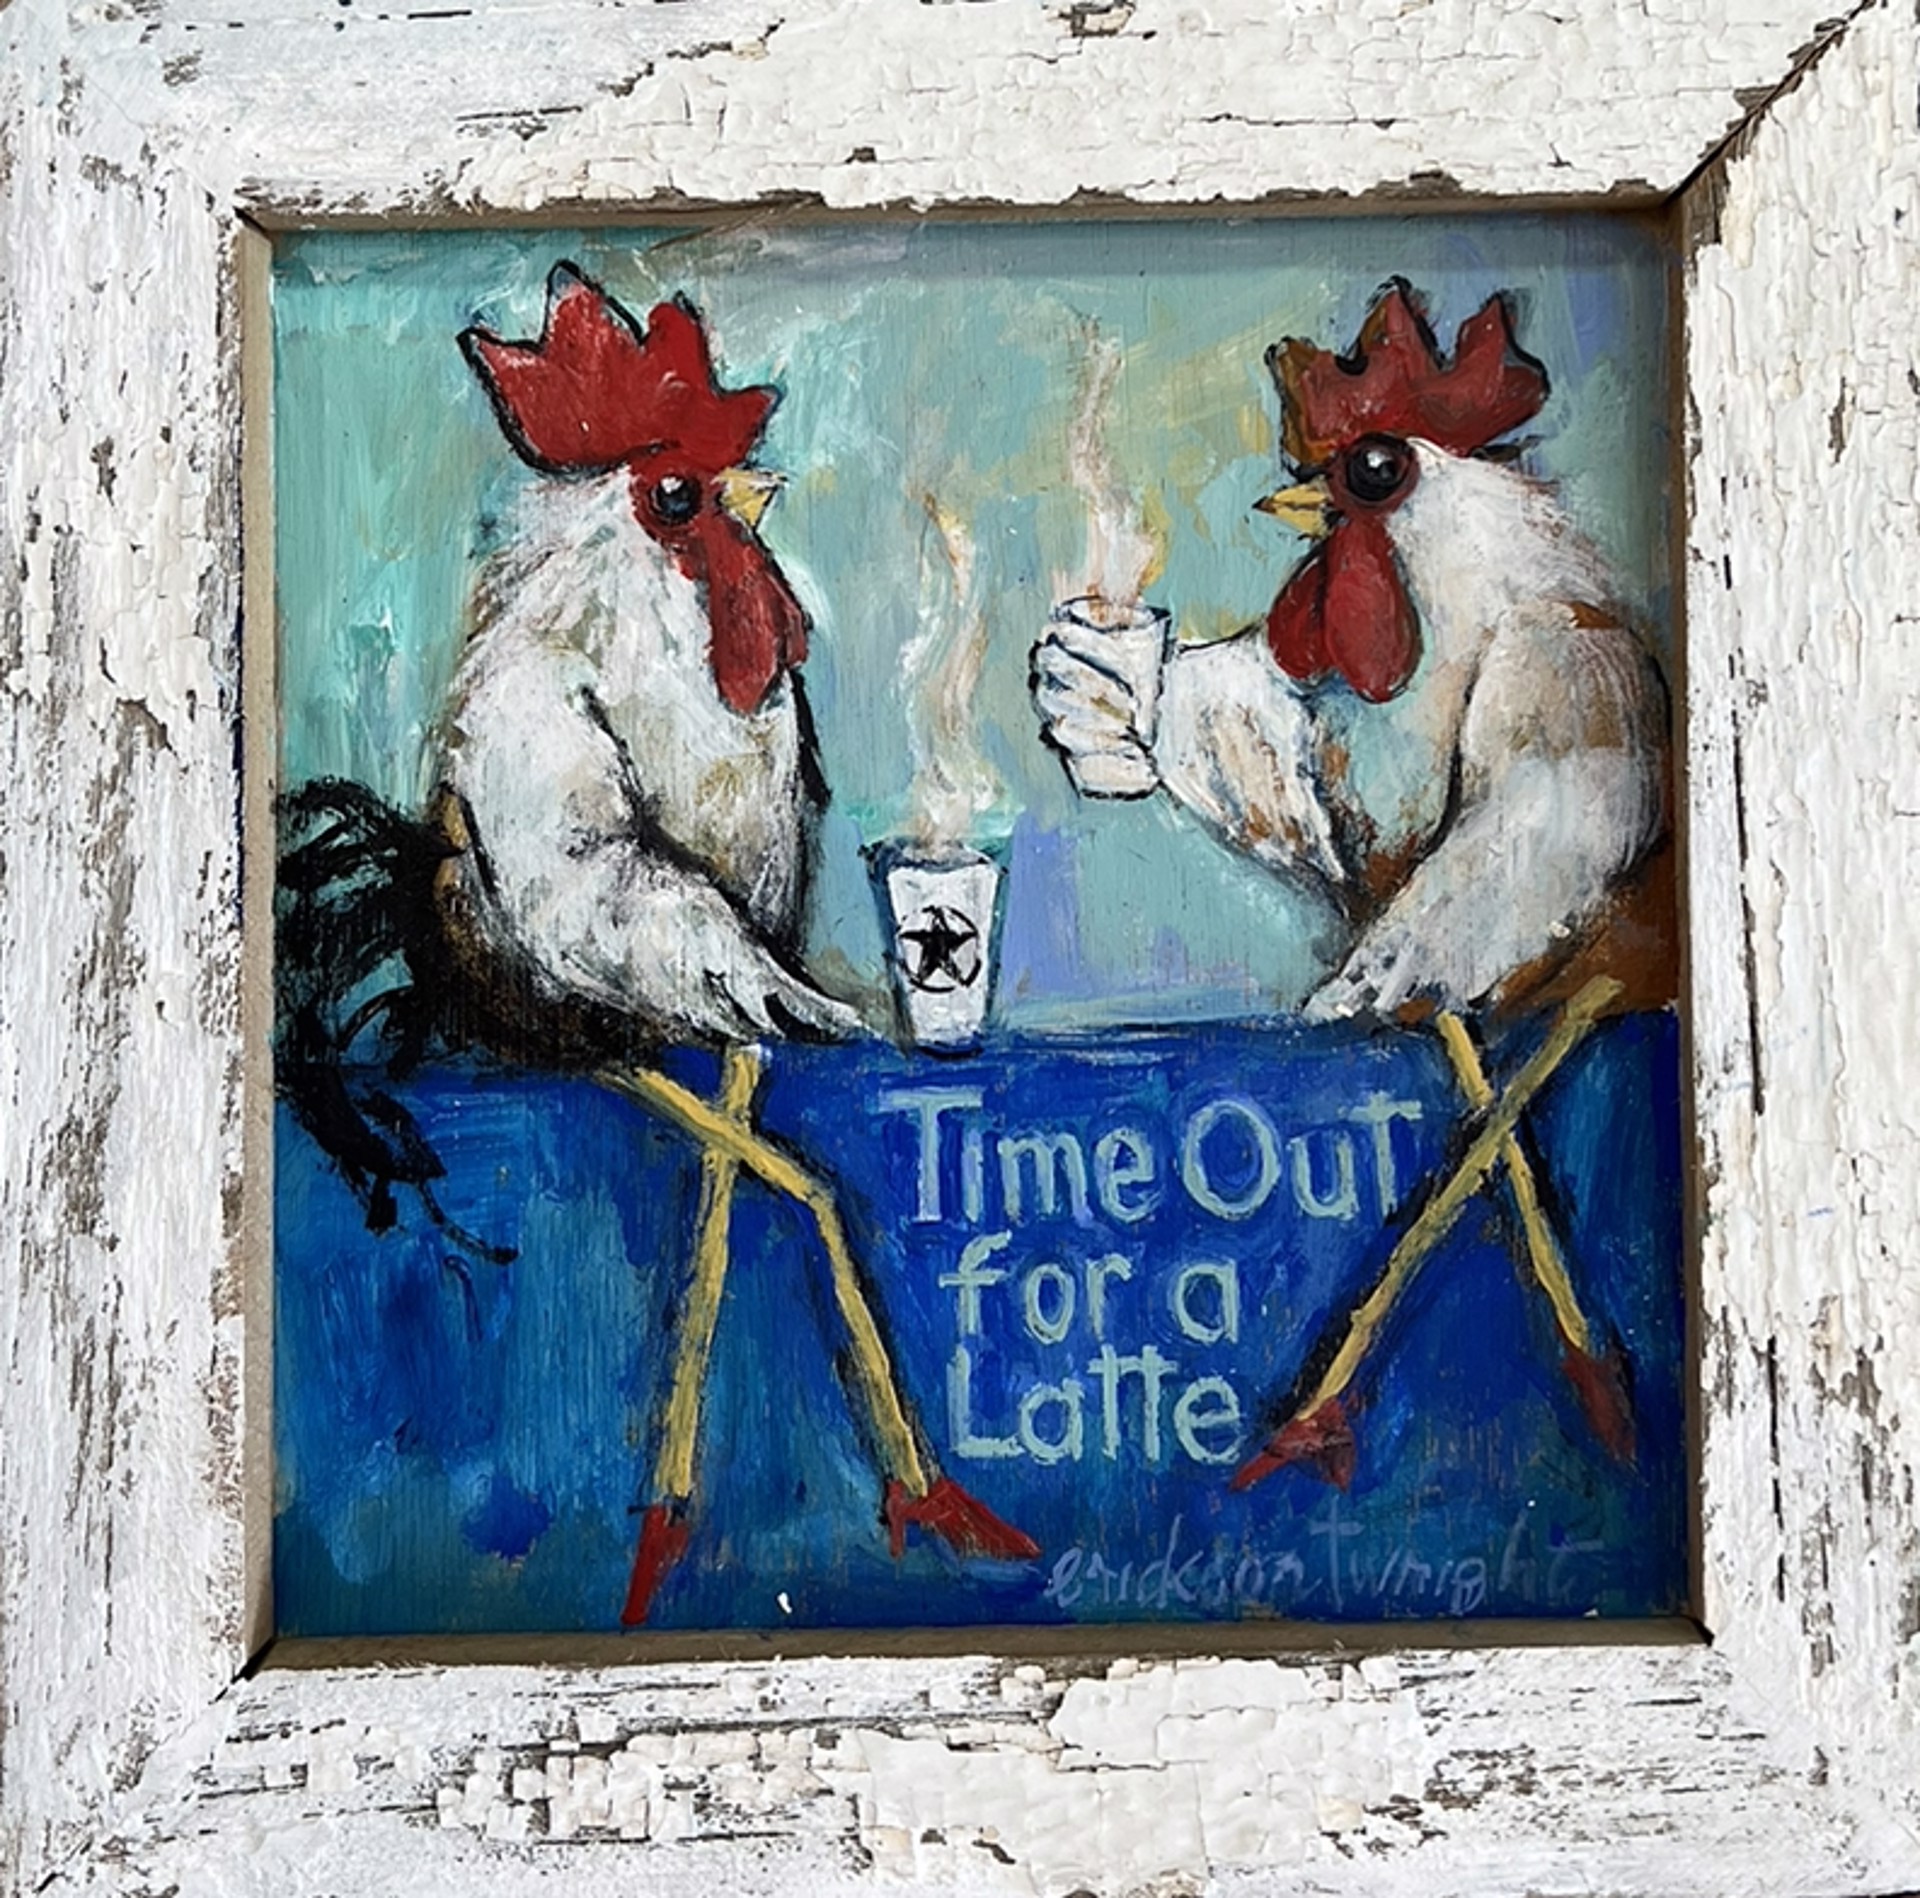 Time Out for a Latte by Sandra Erickson Wright